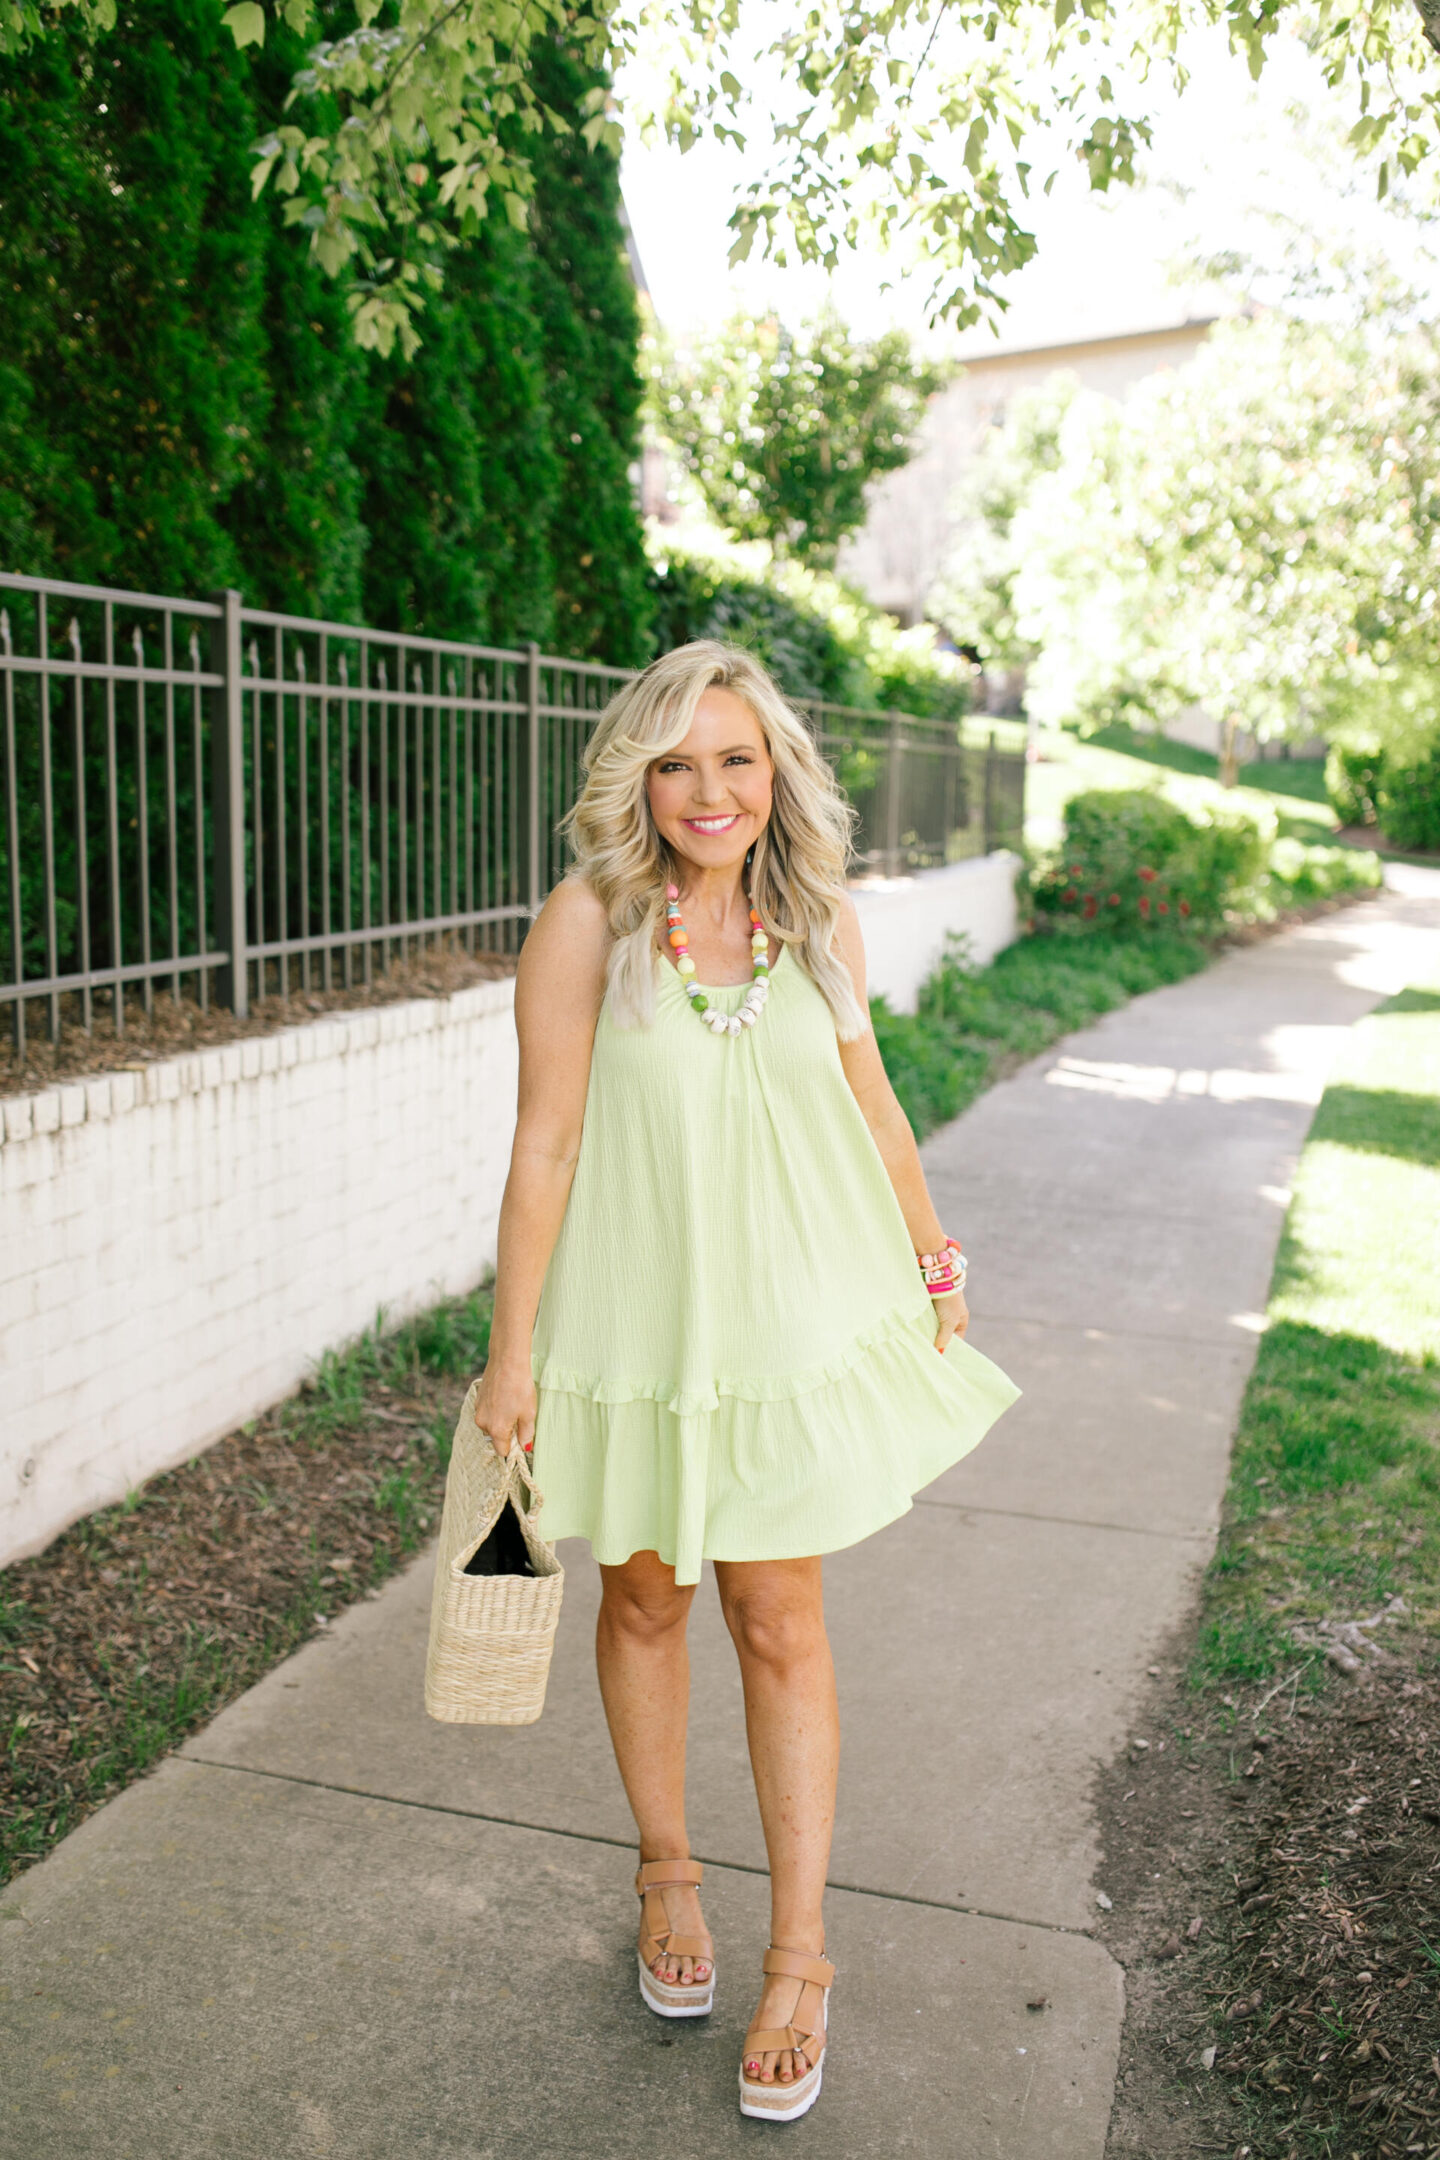 Scoop Dress by popular Nashville fashion blog, Hello Happiness: image of a woman wearing Scoop green cami rifle dress, multi color stretch bracelets, and holding a woven seagrass tote bag.